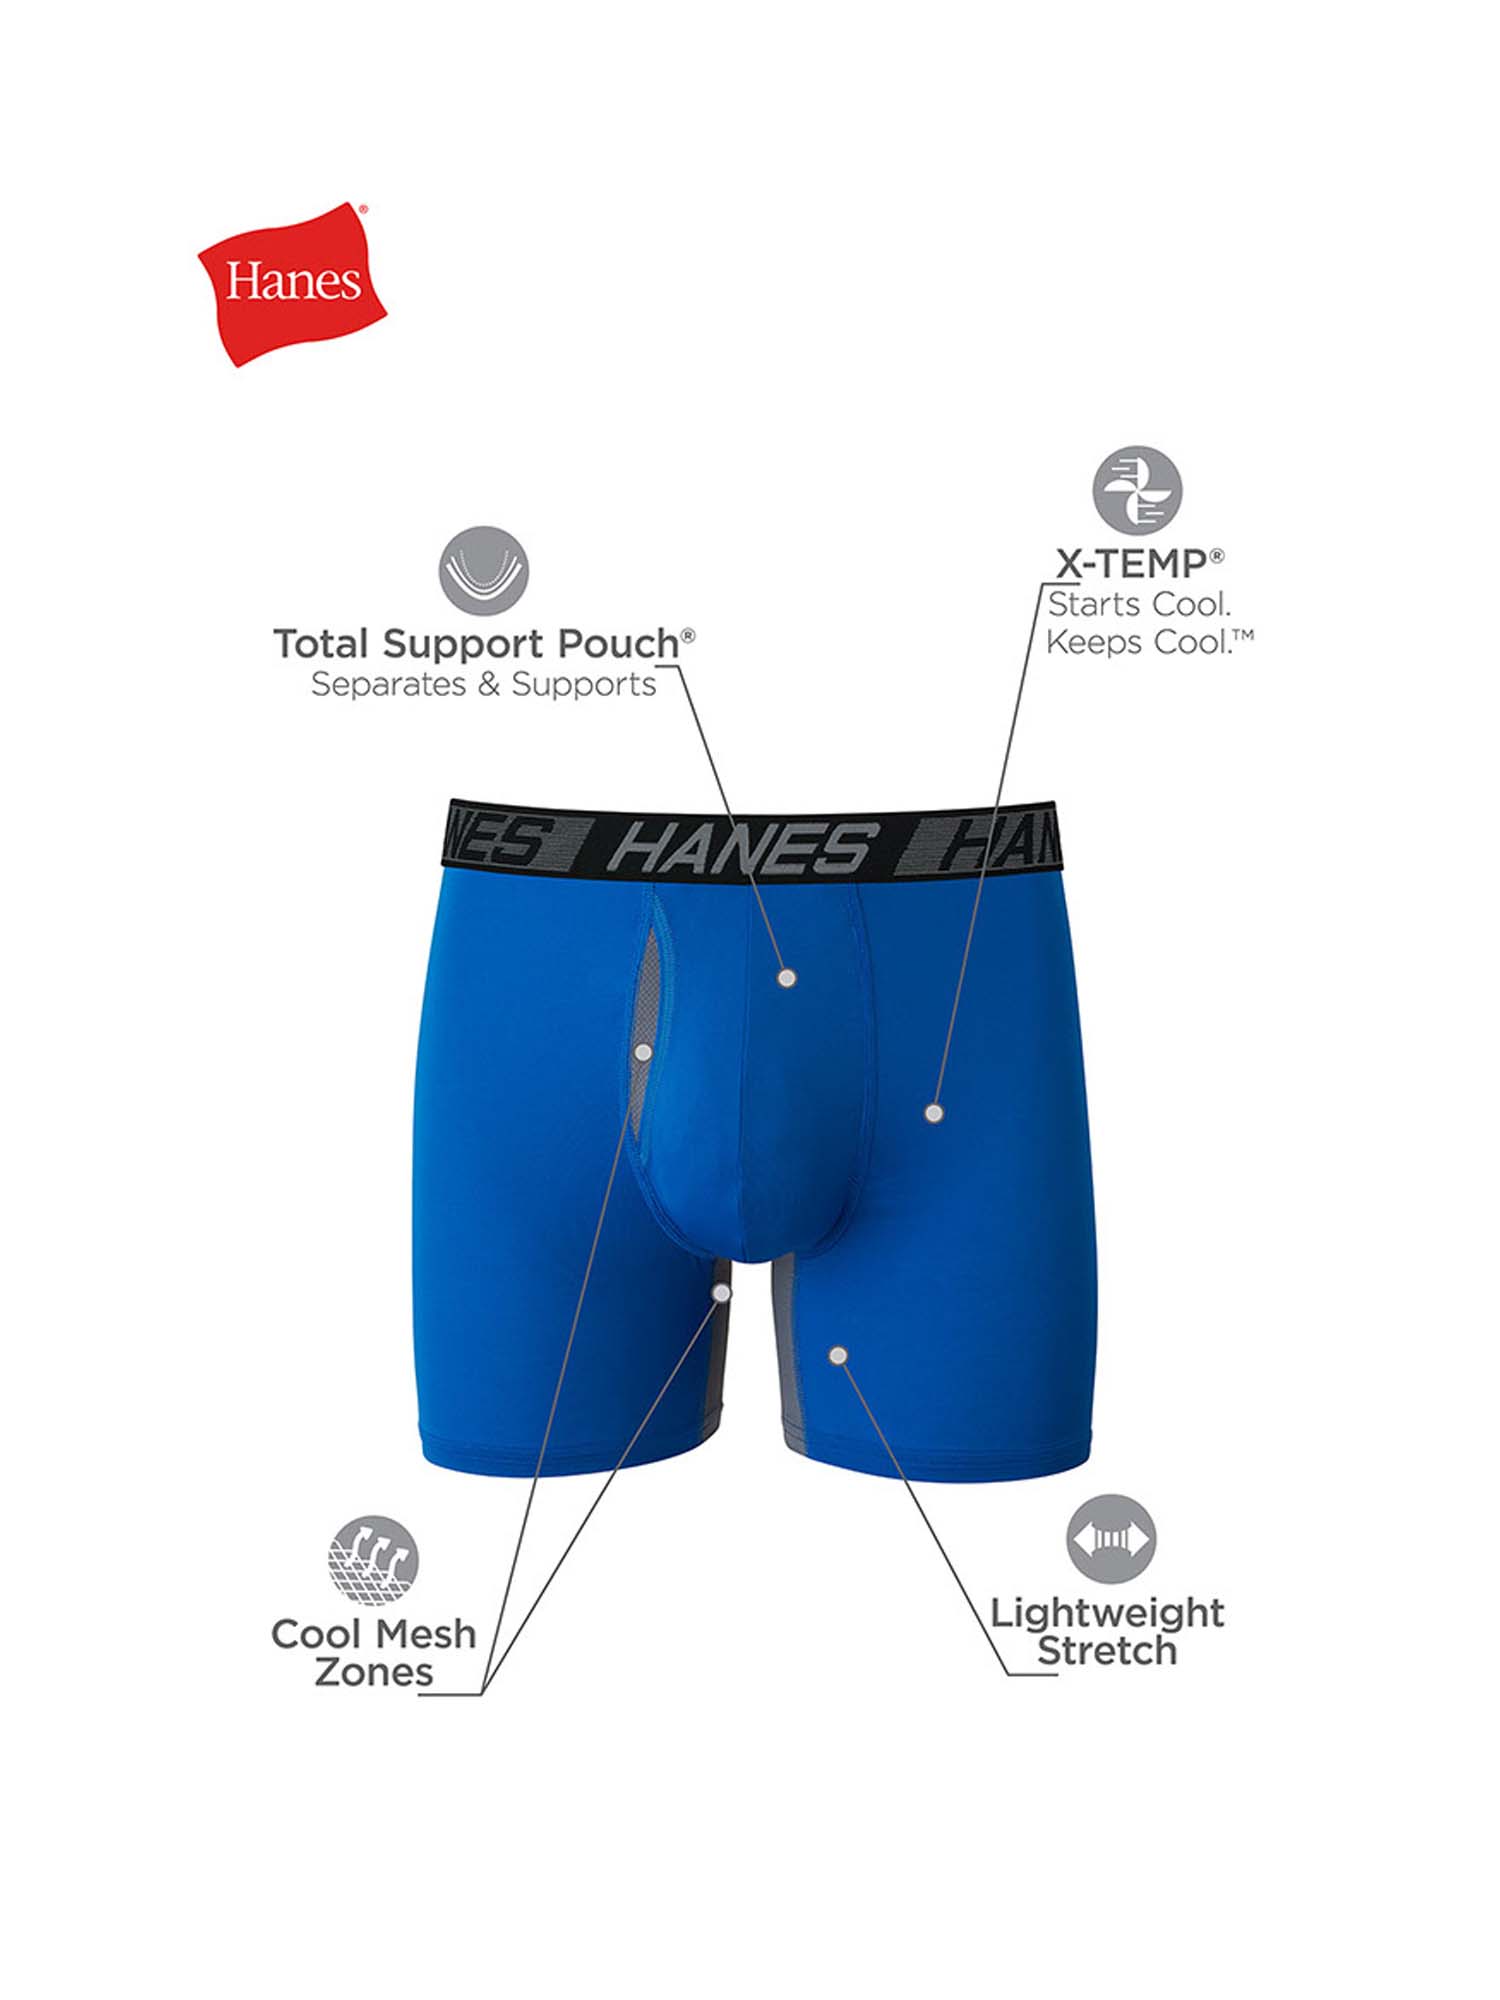 Hanes X-Temp Total Support Pouch Men's Boxer Briefs, Anti-Chafing ...